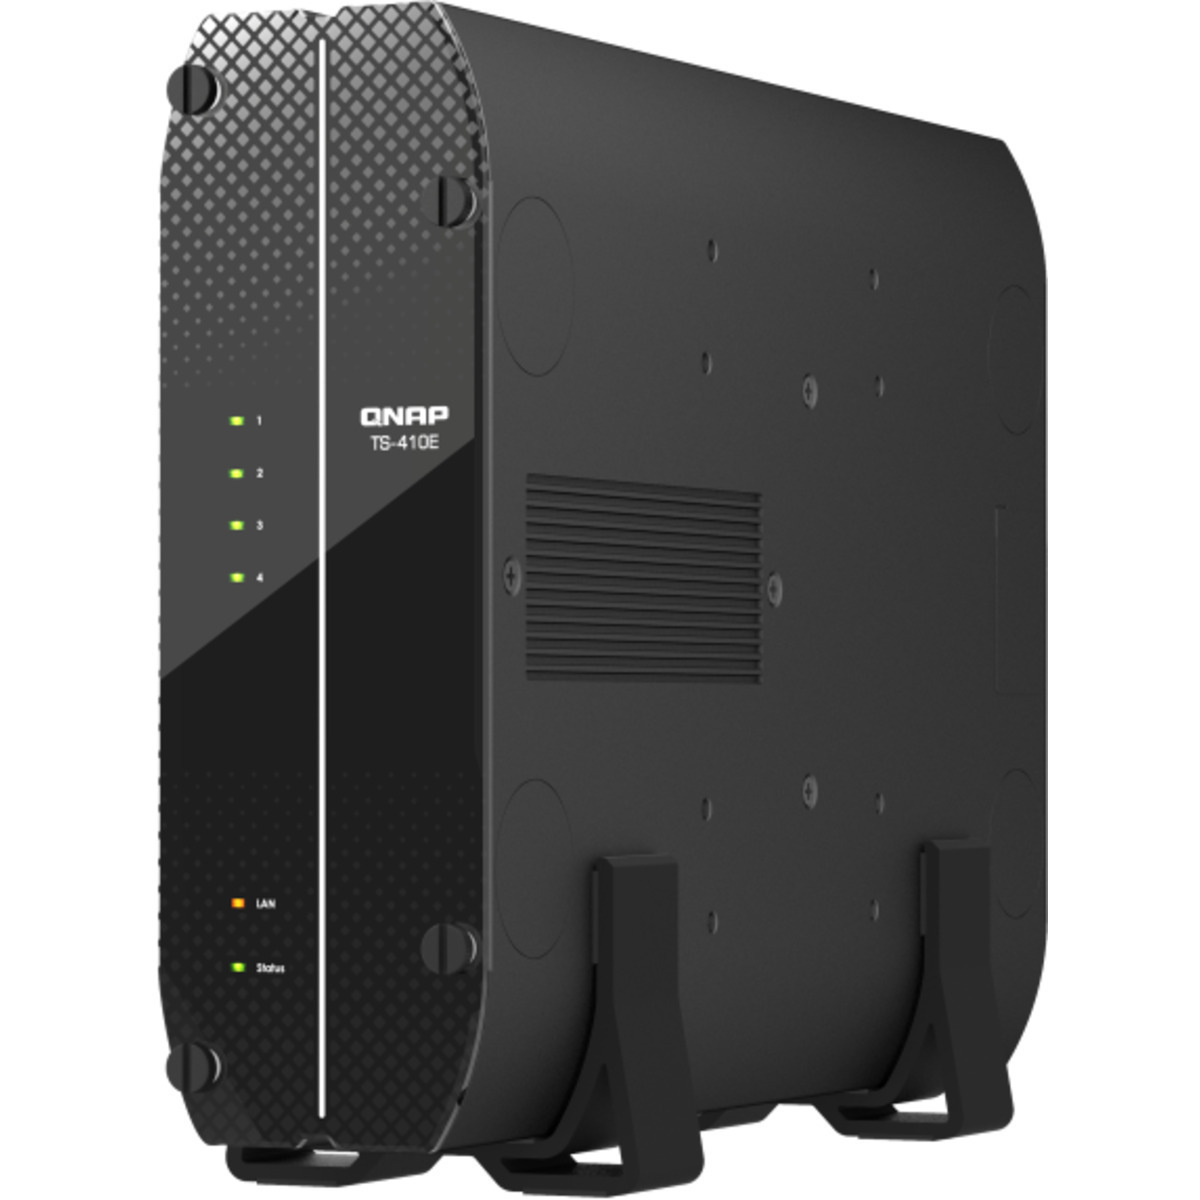 QNAP TS-410E 1tb 4-Bay Desktop Multimedia / Power User / Business NAS - Network Attached Storage Device 2x500gb Sandisk Ultra 3D SDSSDH3-500G 2.5 560/520MB/s SATA 6Gb/s SSD CONSUMER Class Drives Installed - Burn-In Tested TS-410E